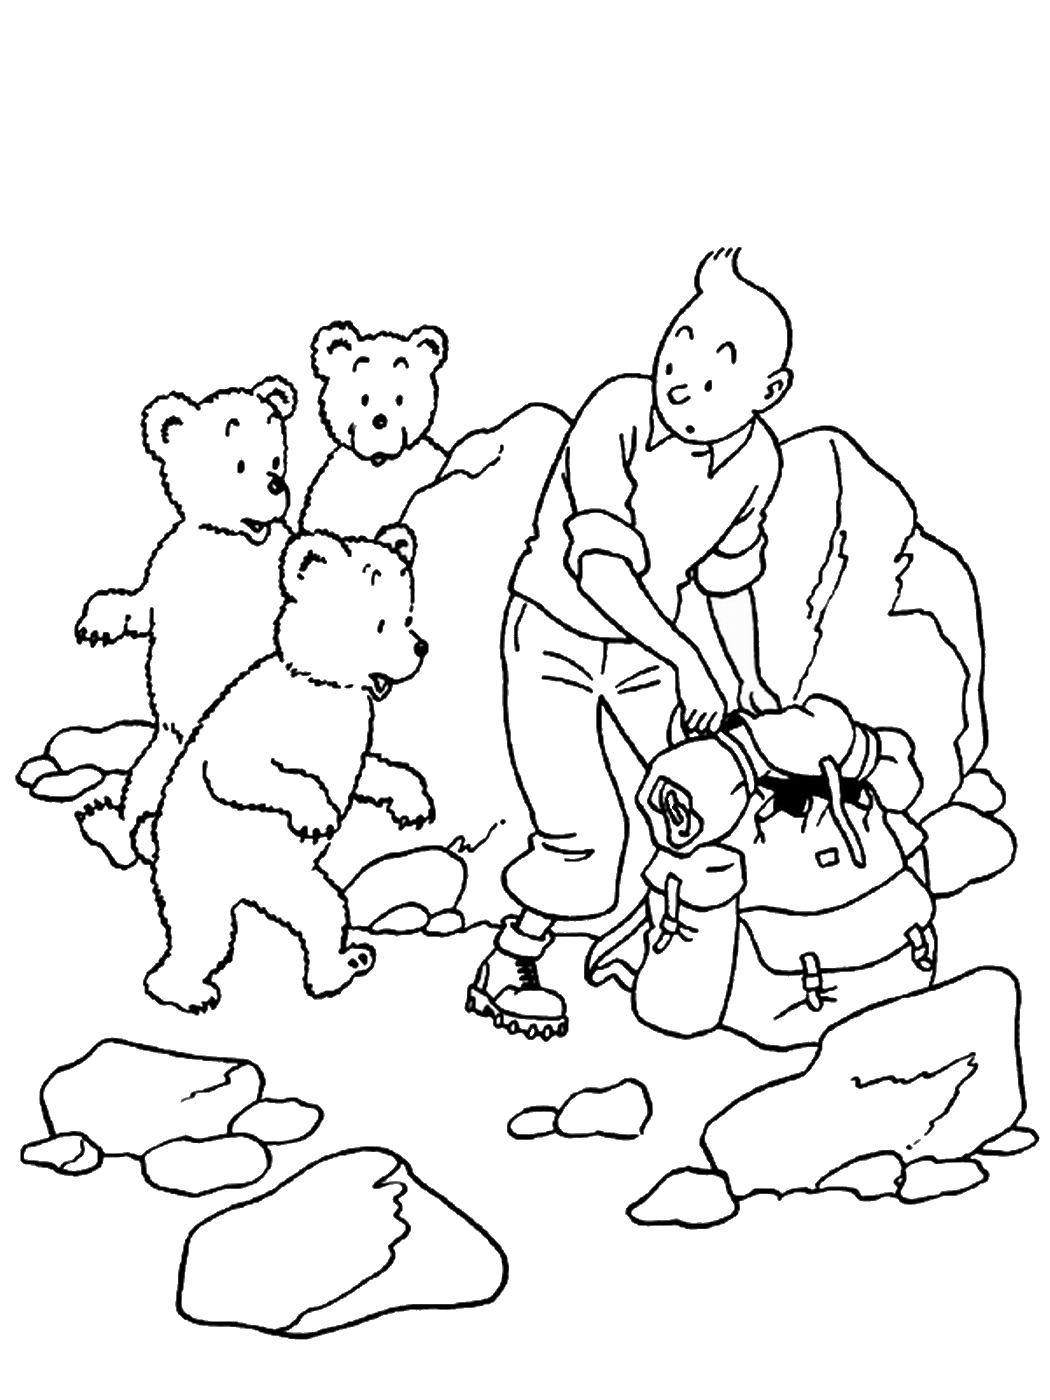 Tintin Coloring Pages Cartoons tintin_cl_15 Printable 2020 6710 Coloring4free